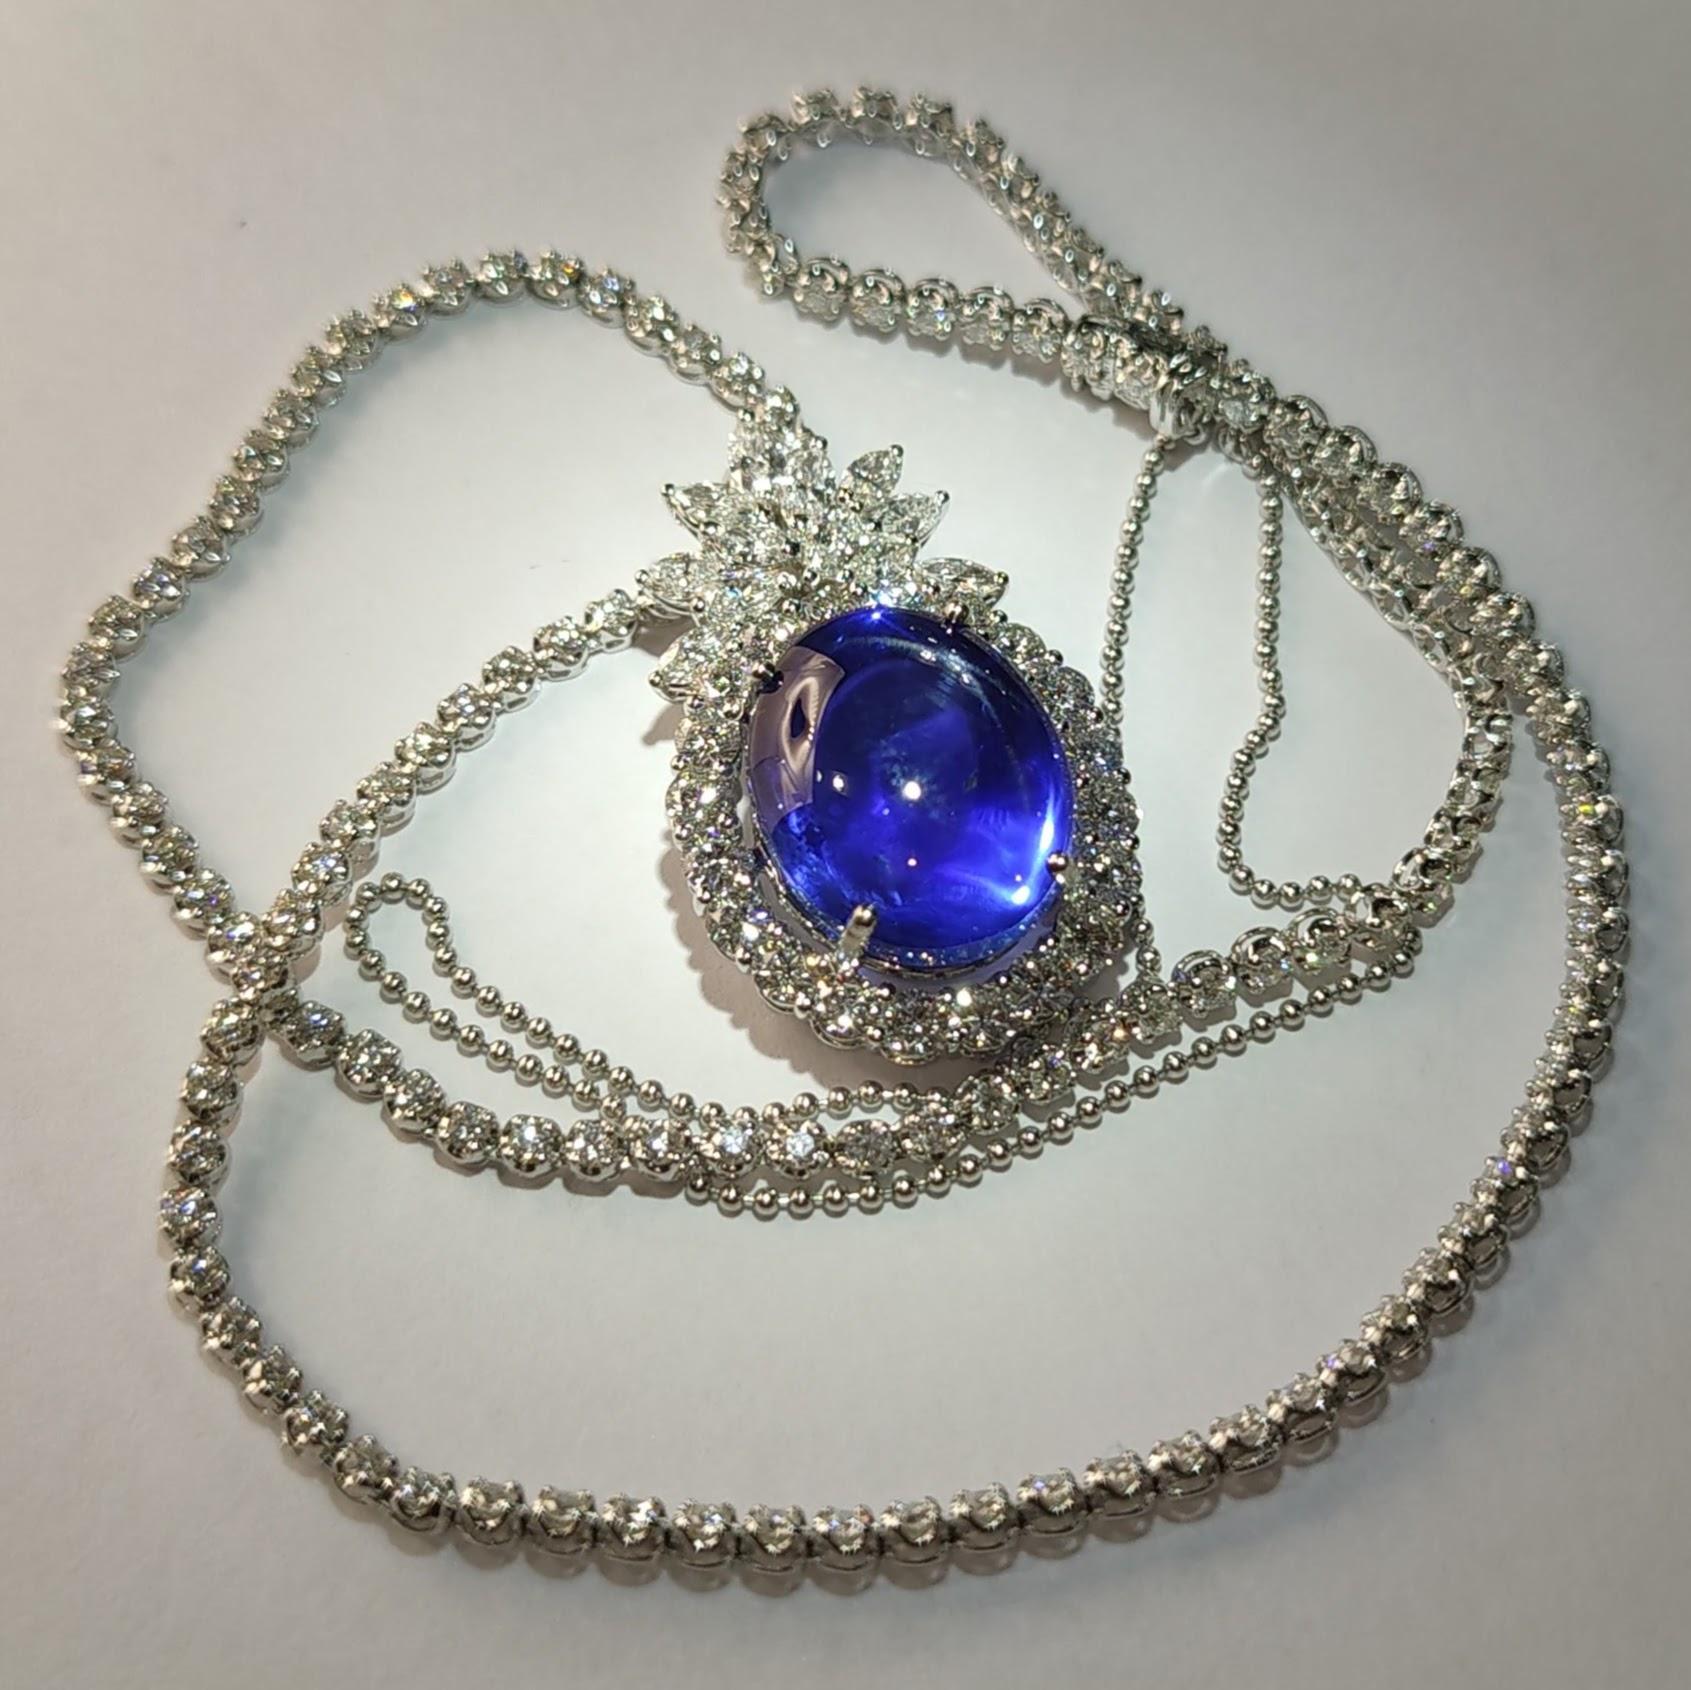 Women's Gublin Certified 26.88ct Unheated Blue Star Sapphire & 7.41ct Diamond Necklace For Sale